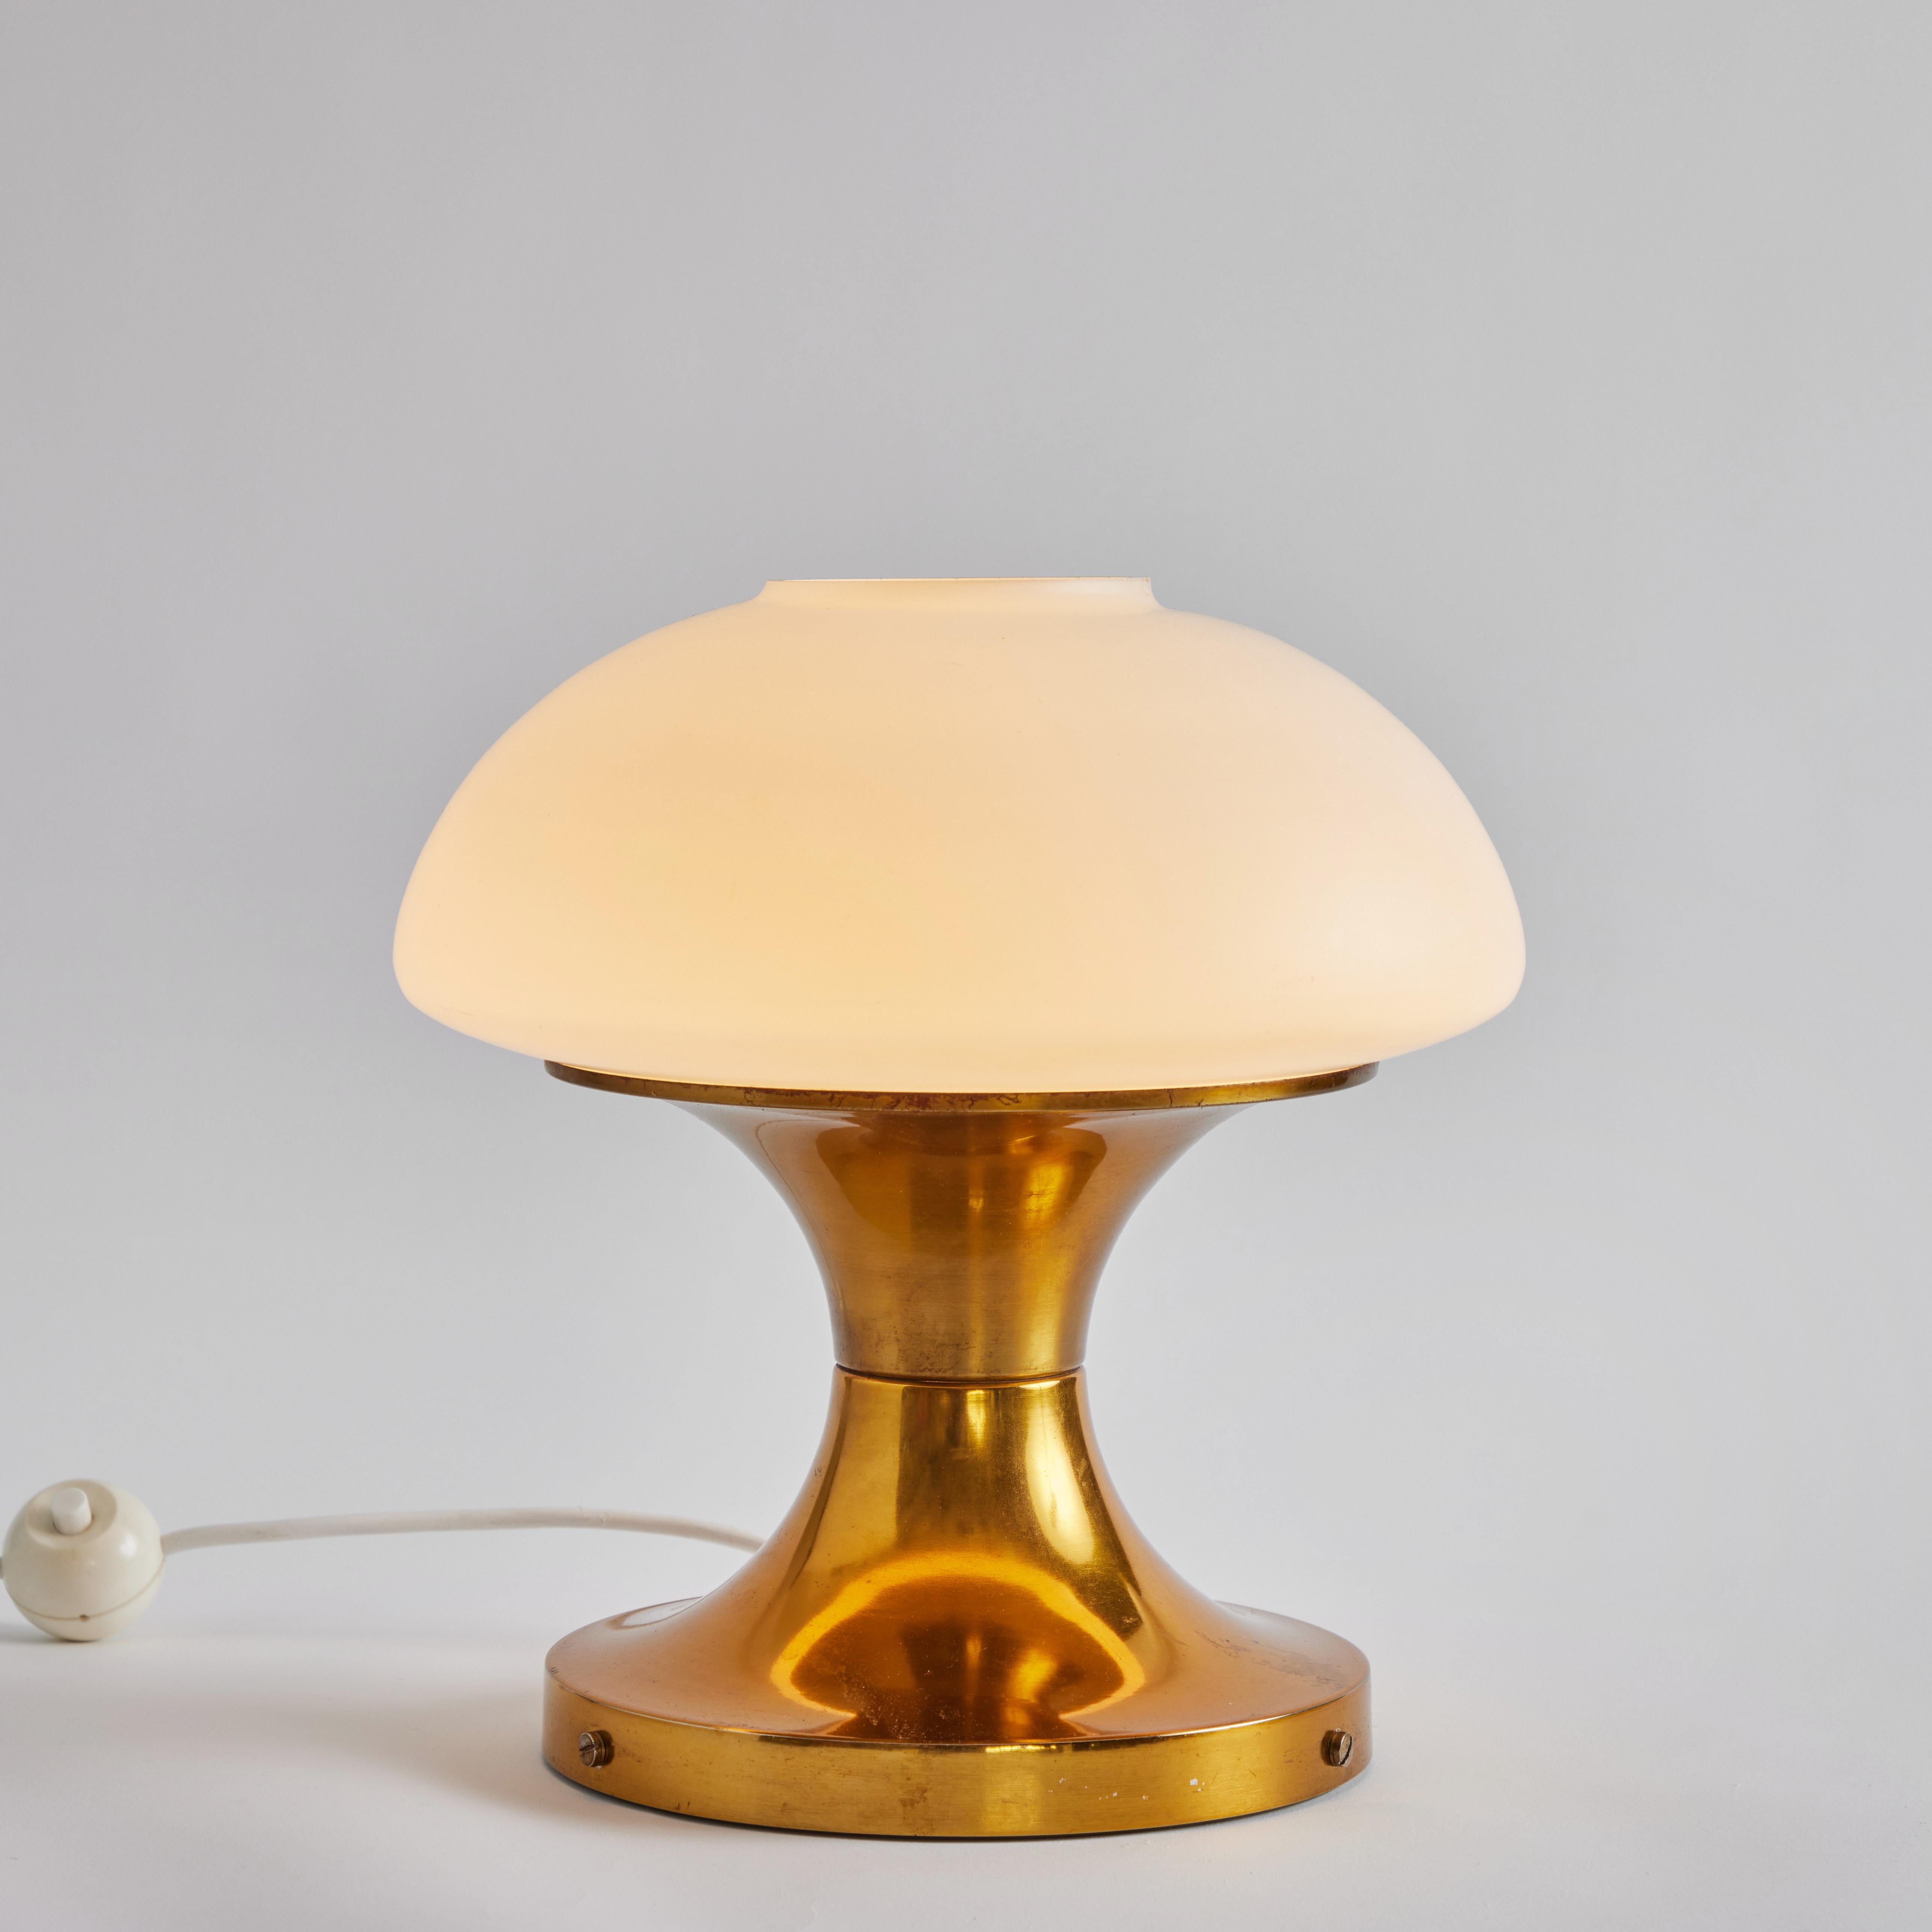 Rare 1970s brass & glass table lamp for AKA Elektrik, East Germany. This extremely rare and iconic design is executed in brass and opaline glass with original sculptural on/off switch. Retains original manufacturer's stamp.

AKA Elektrik / VEB